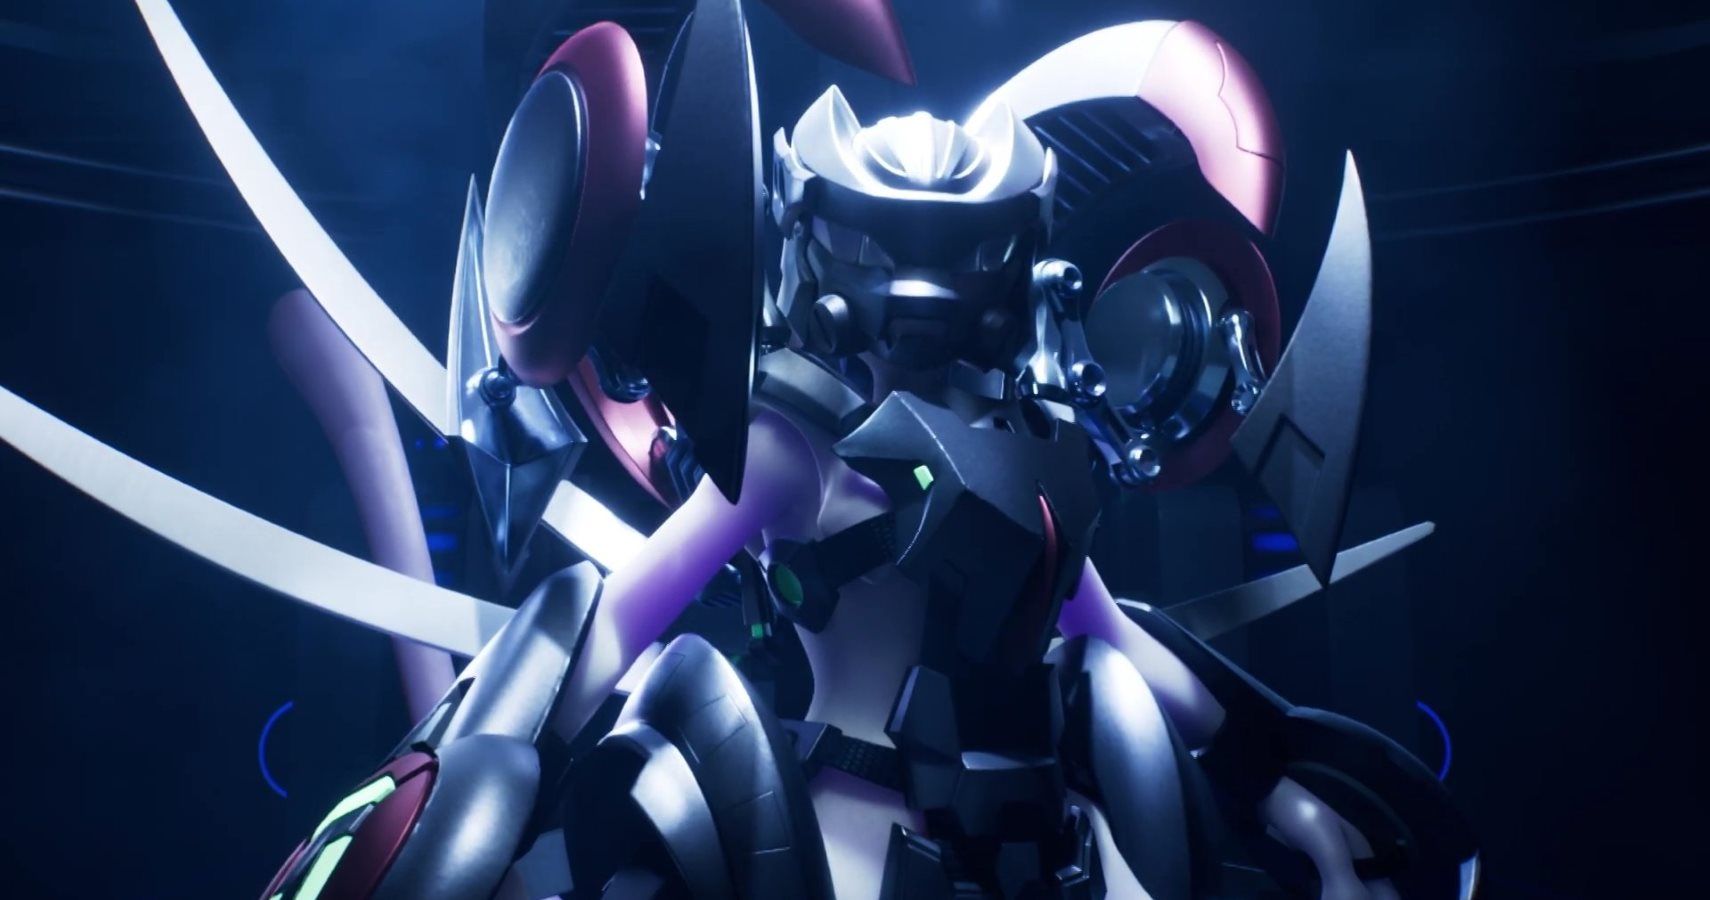 Debunked: Armored Evolutions Probably Won’t Be Coming To Pokémon Sword & Shield